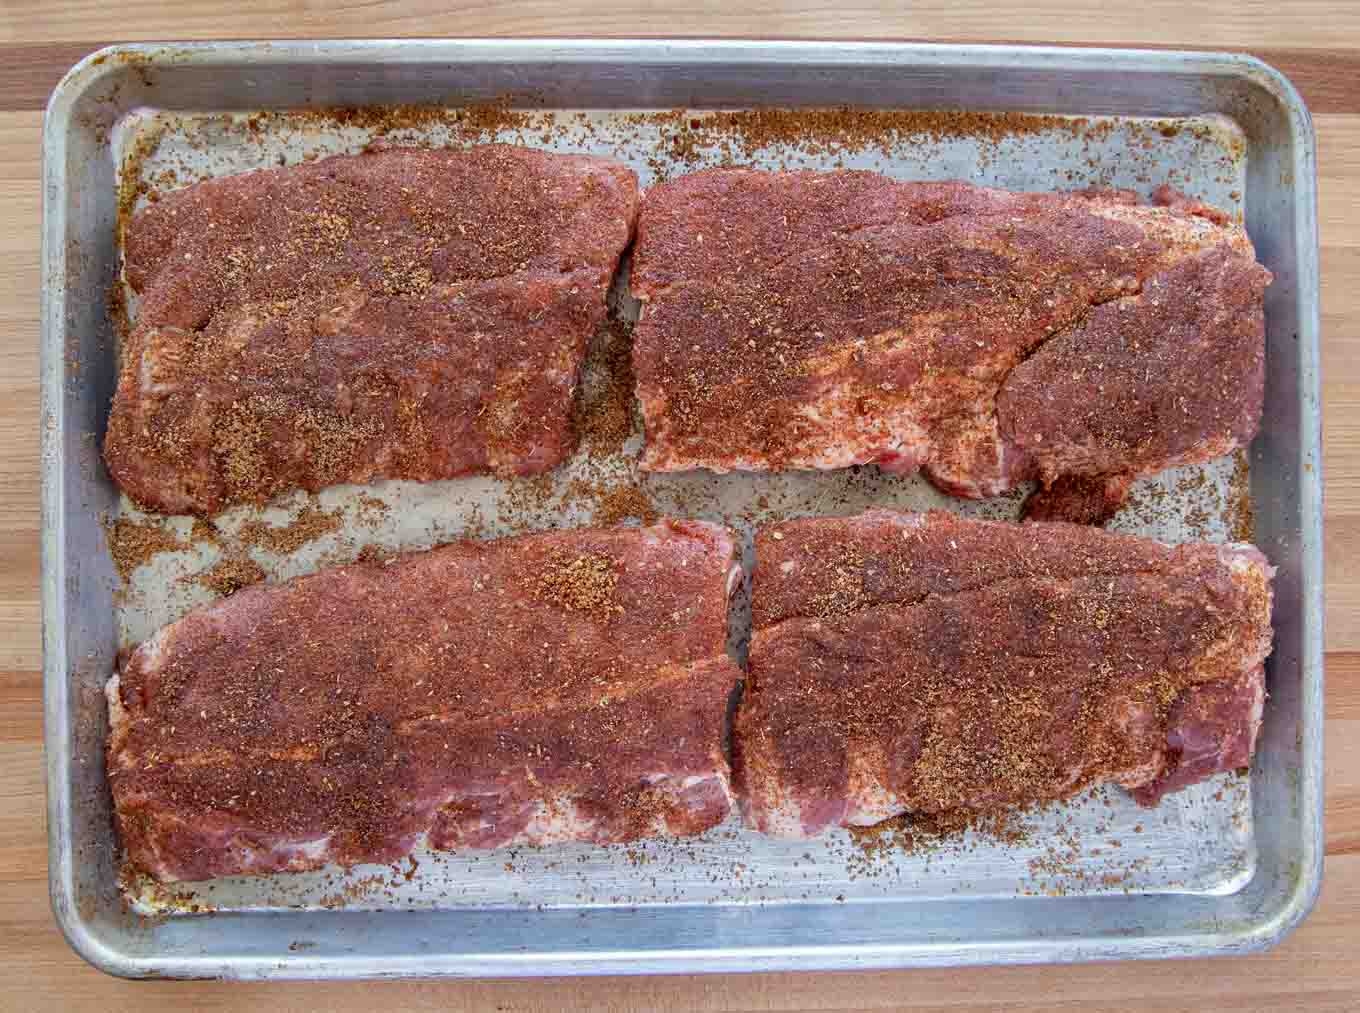 4 half racks of baby back ribs coated with a dry rub on a sheet pan